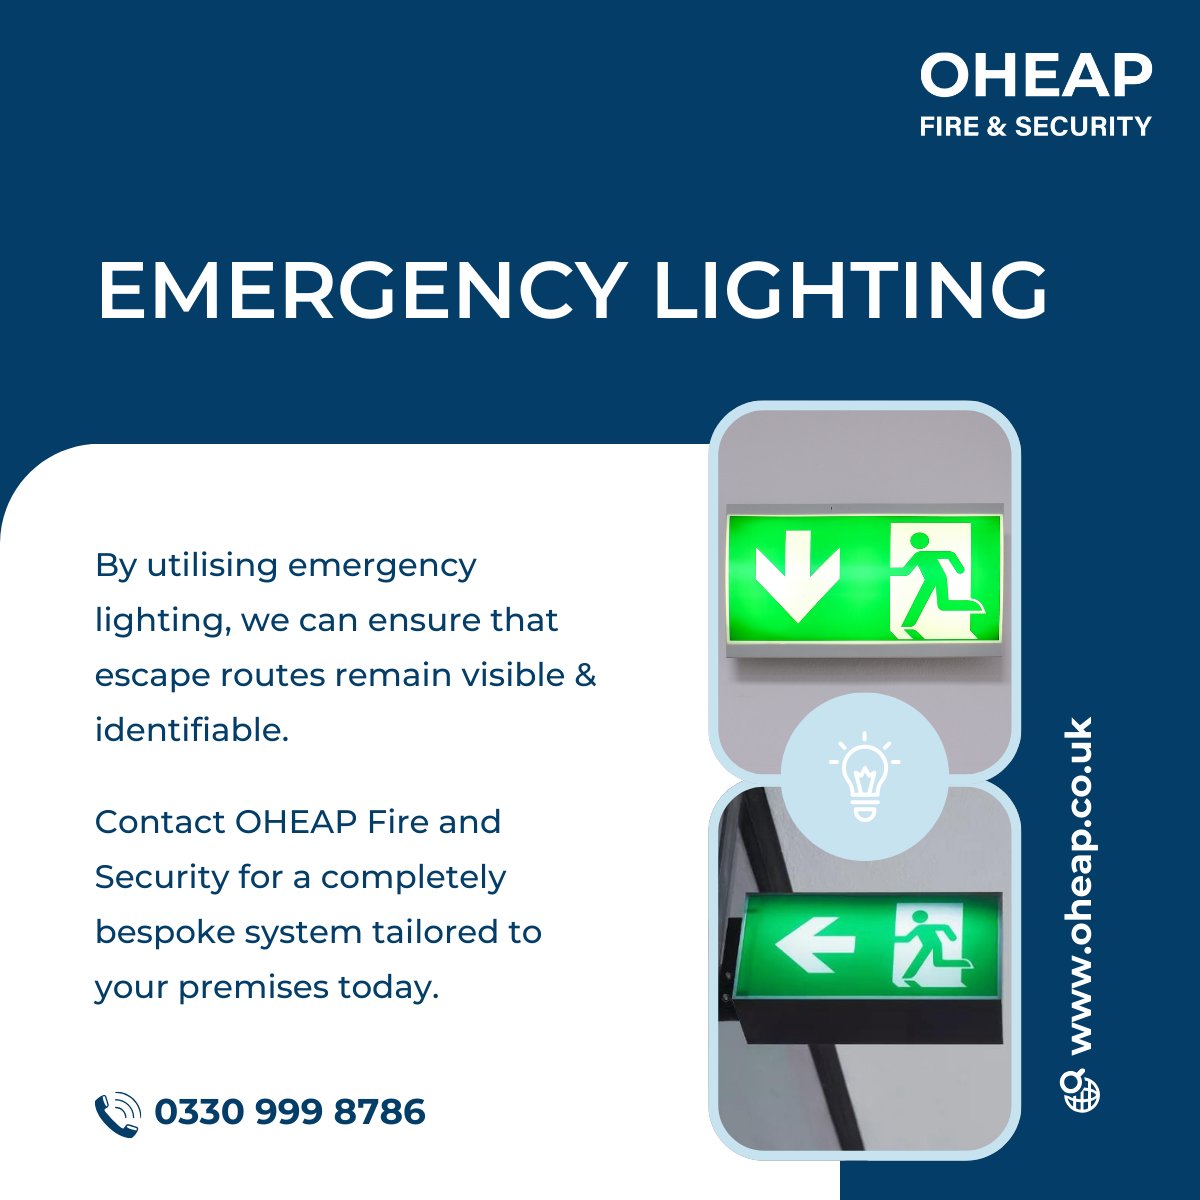 Emergency lighting plays an extremely important role in fire safety.
Not only that, but it is a legal requirement for all buildings in the UK to have a system which allows people to see and exit a building in an emergency. ✔️

#emergencylighting #firesafety #safetyfirst